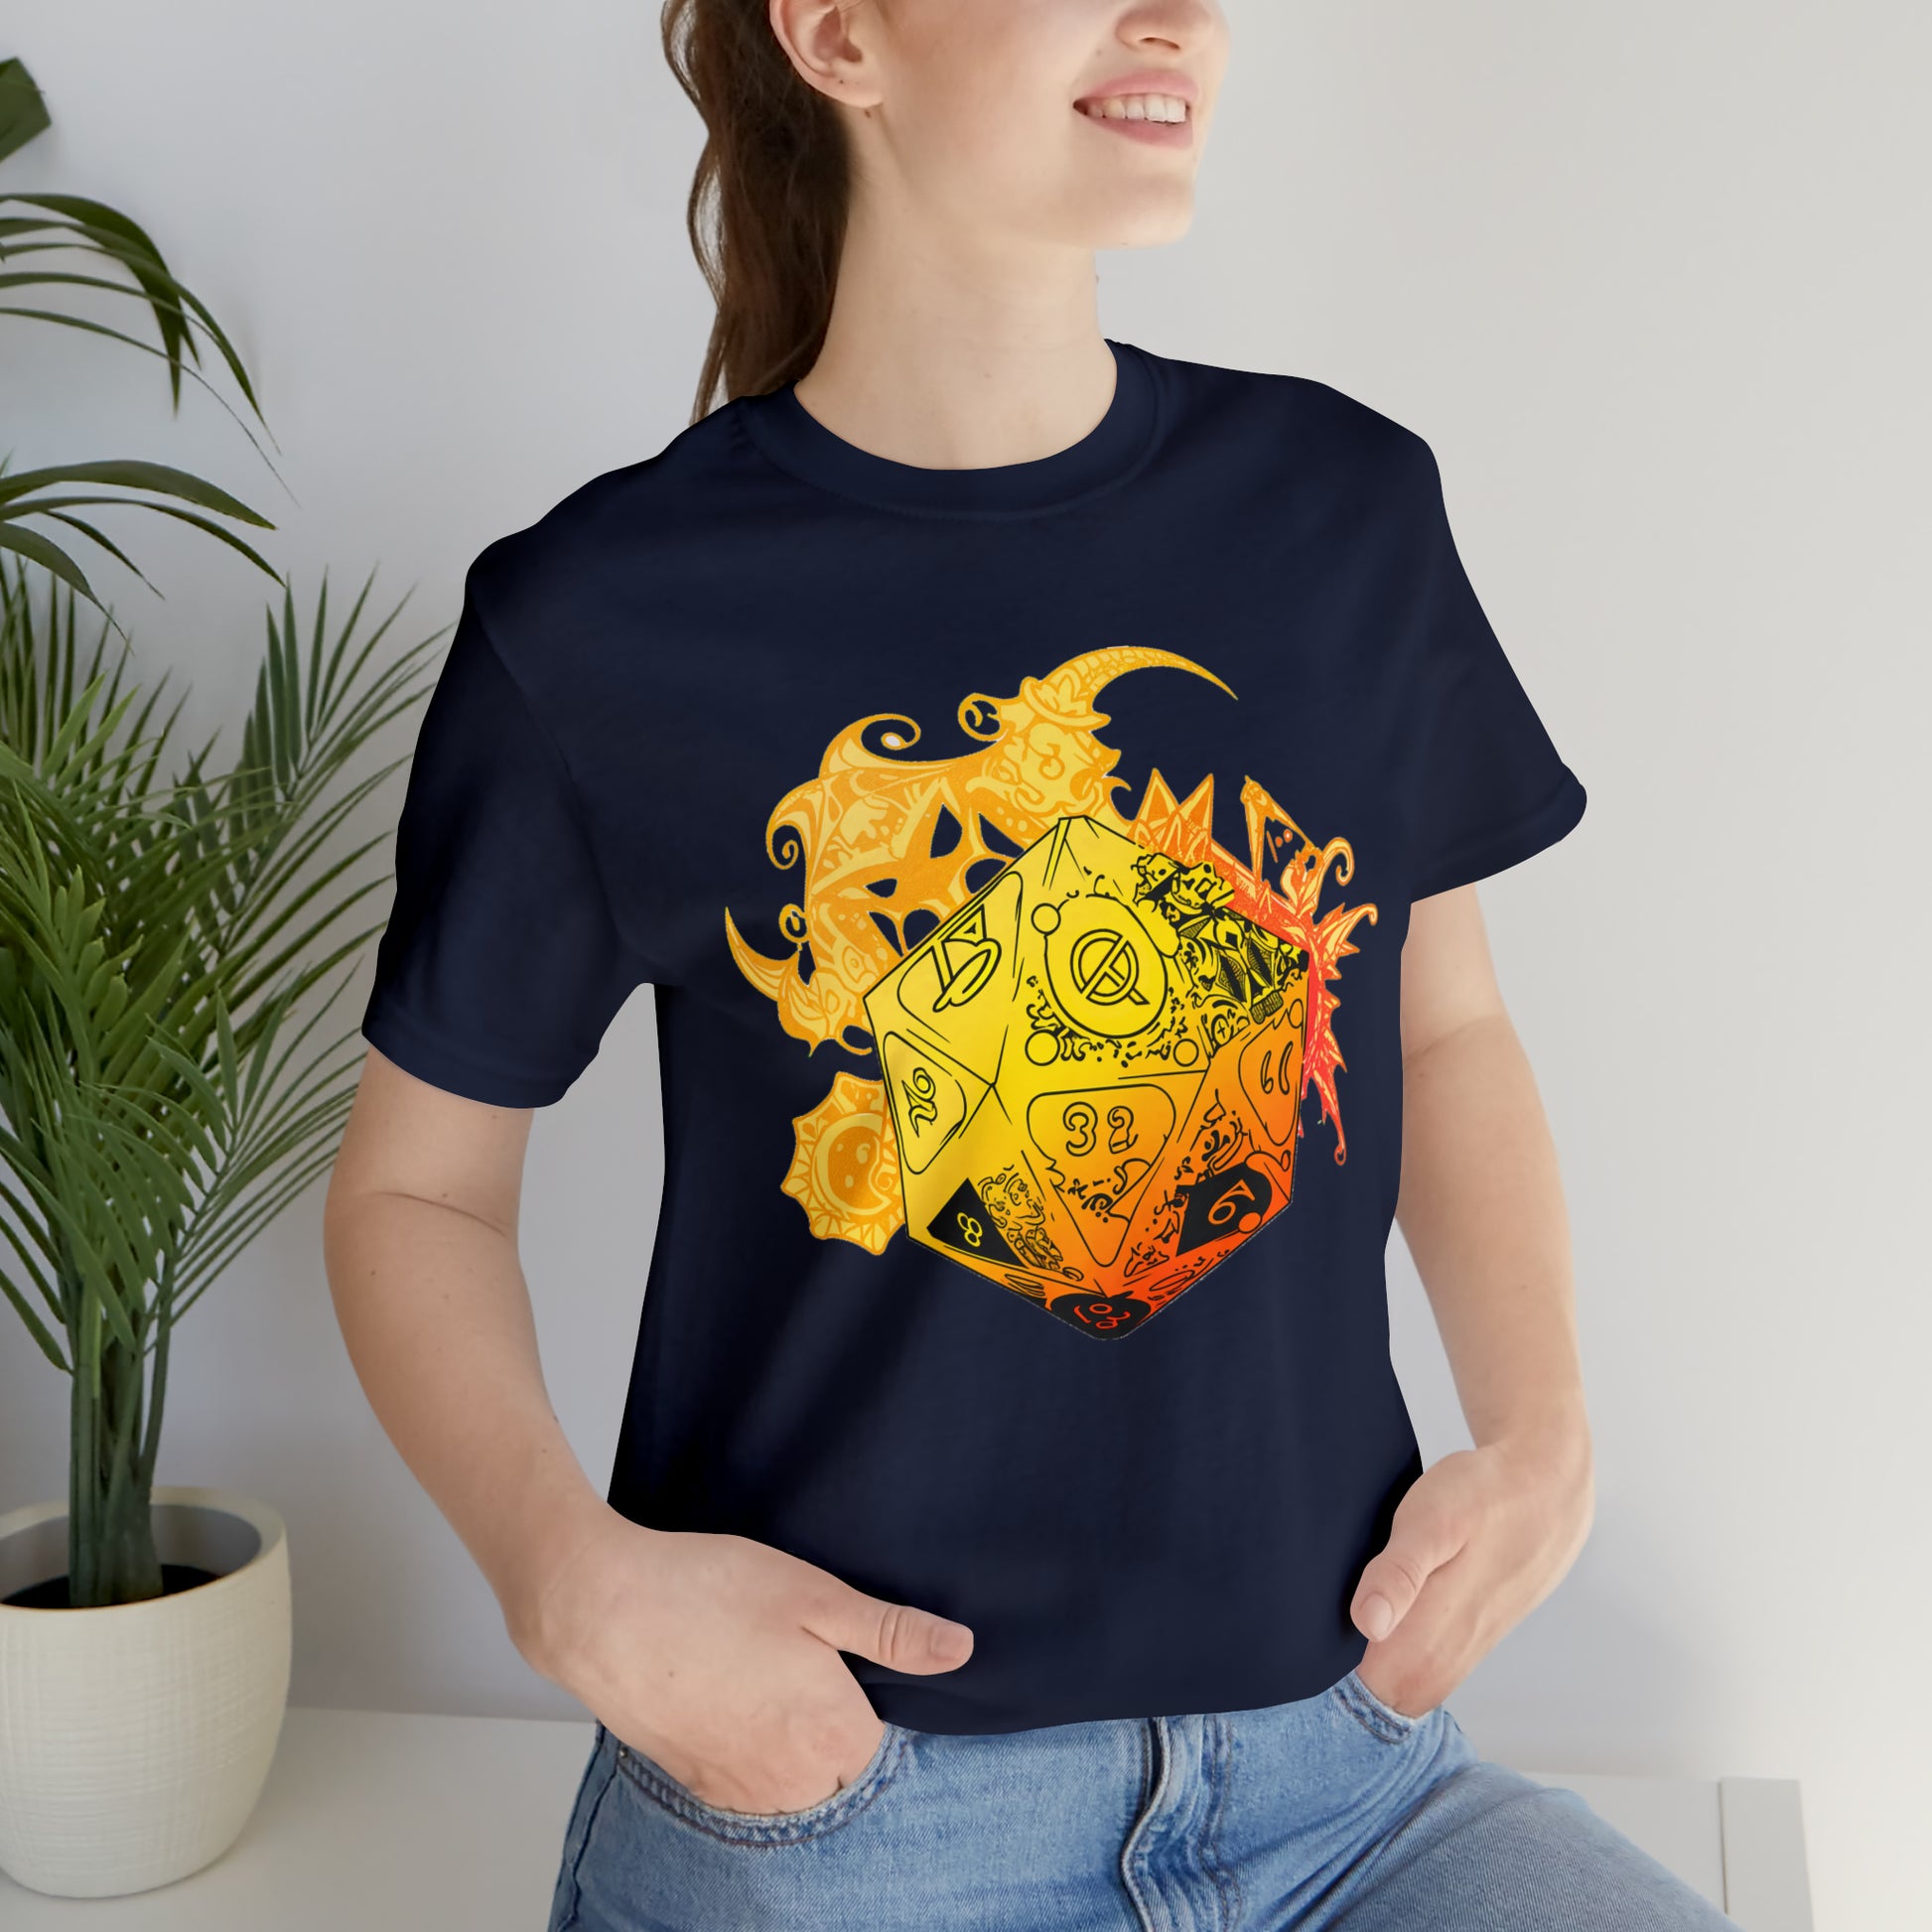 navy-quest-thread-tee-shirt-with-large-yellow-dragon-dice-on-center-of-shirt